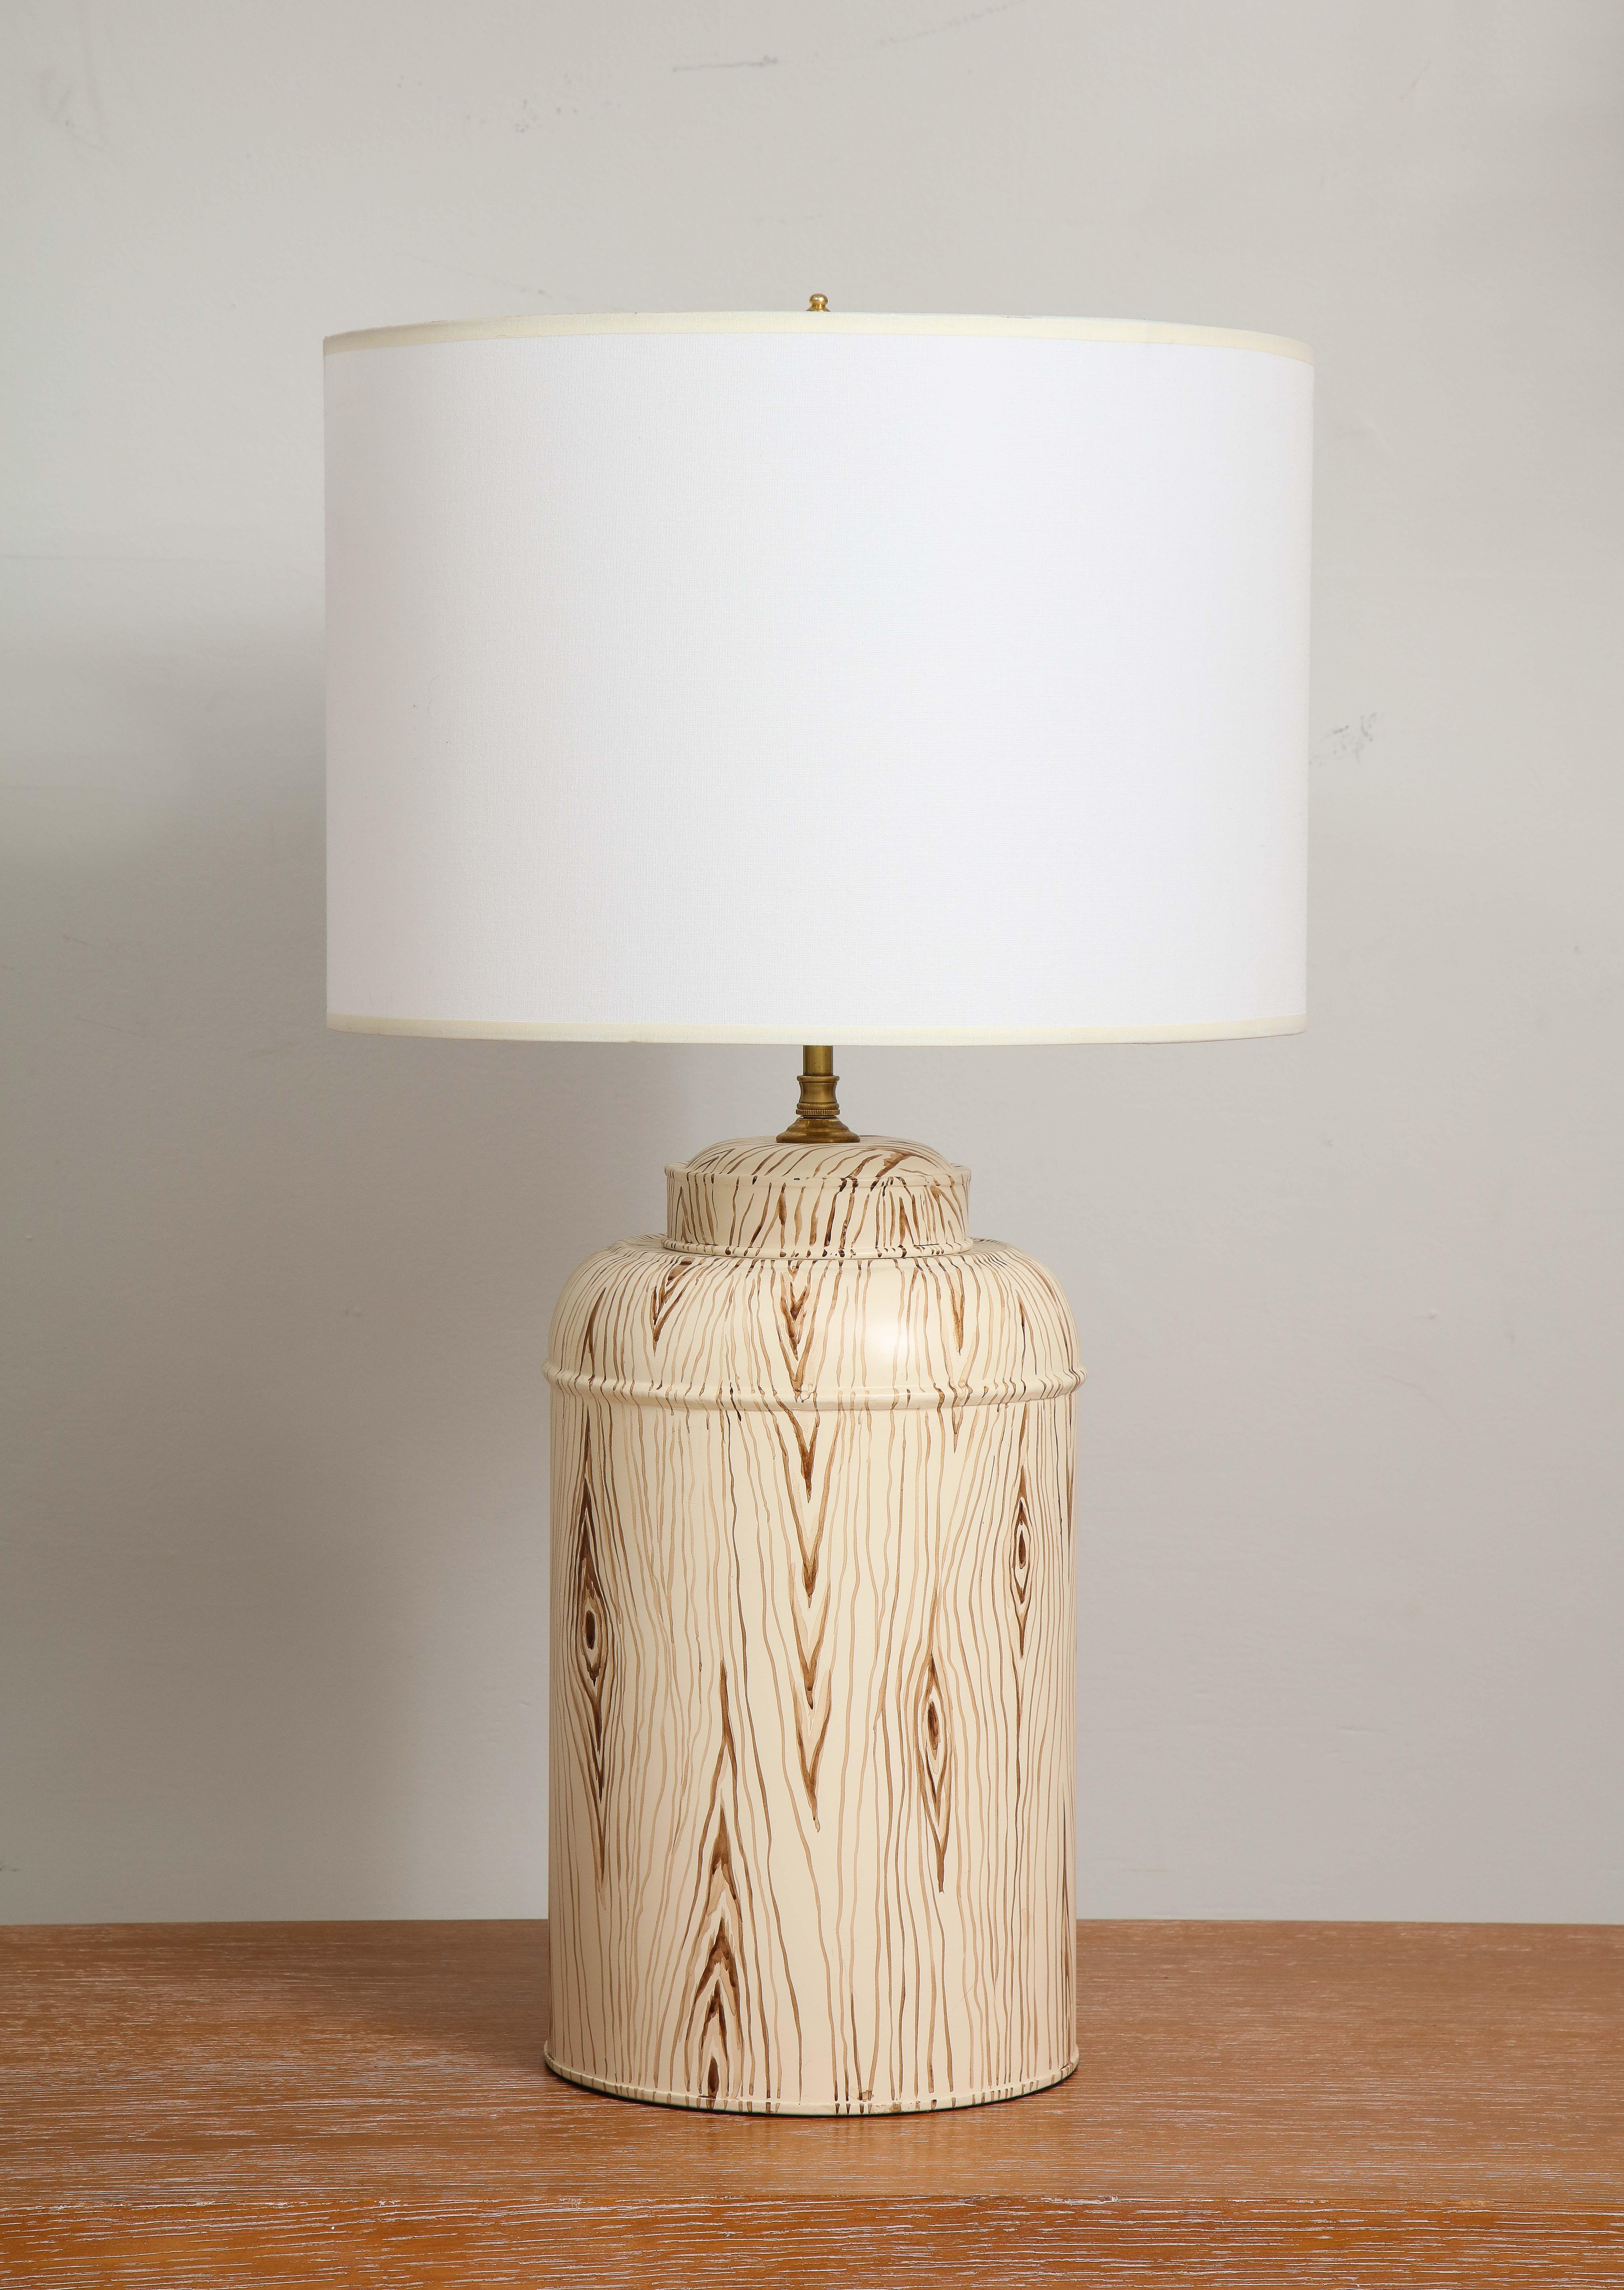 Pair of tole faux-painted canister lamps.
Lamp shades are not included.
Measures: Overall height: 29.25